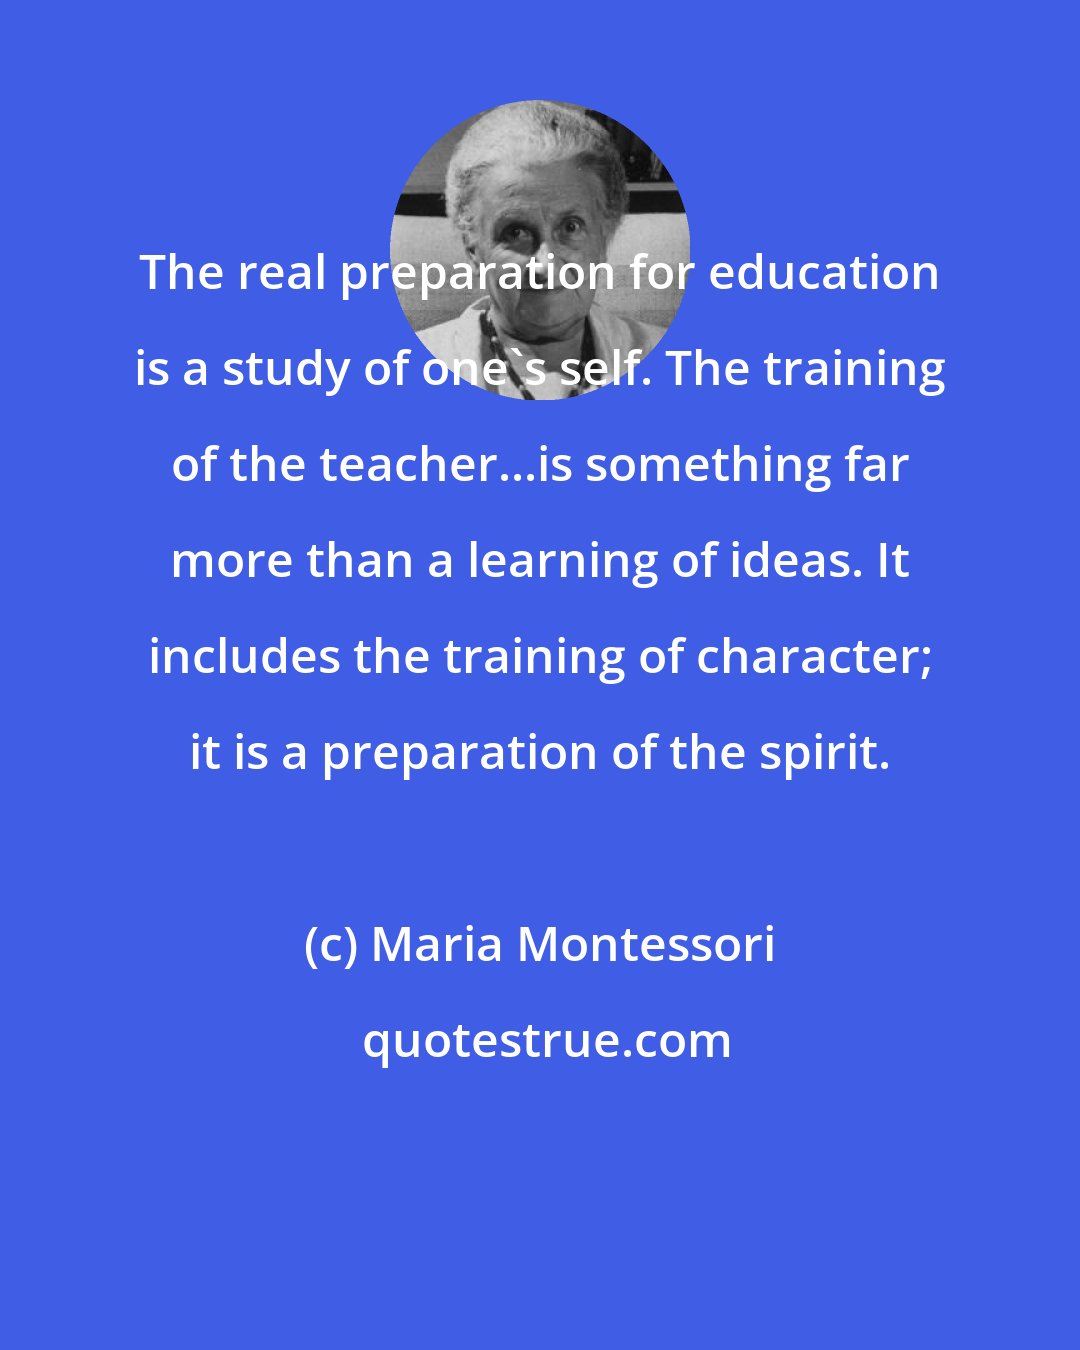 Maria Montessori: The real preparation for education is a study of one's self. The training of the teacher...is something far more than a learning of ideas. It includes the training of character; it is a preparation of the spirit.